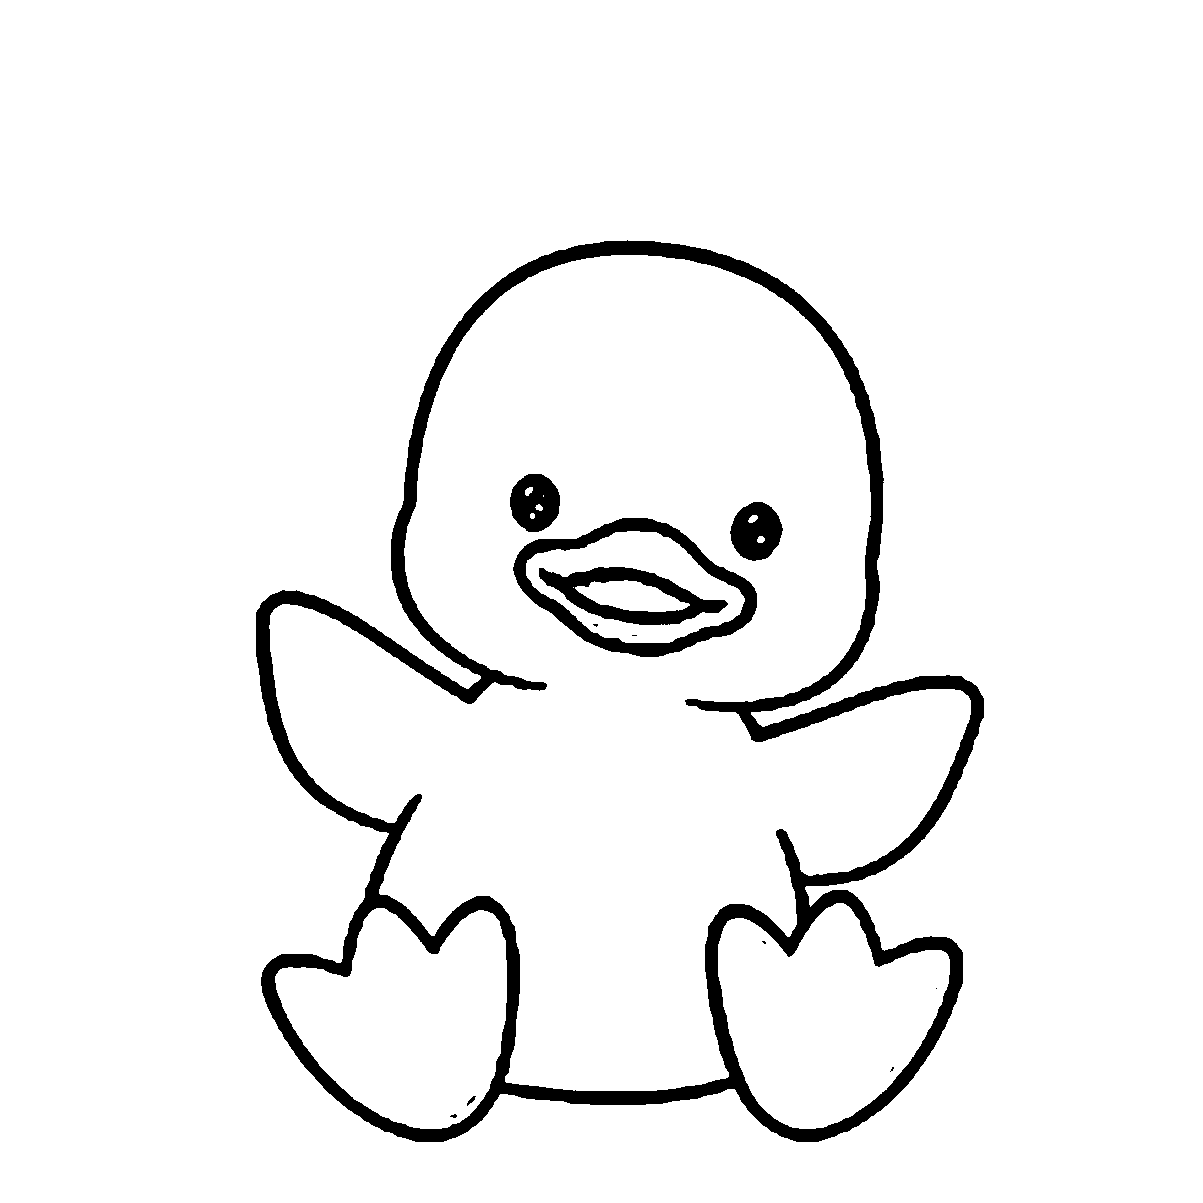 coloring sheet duck duck coloring pages chicken coloring pages chicken duck coloring sheet 